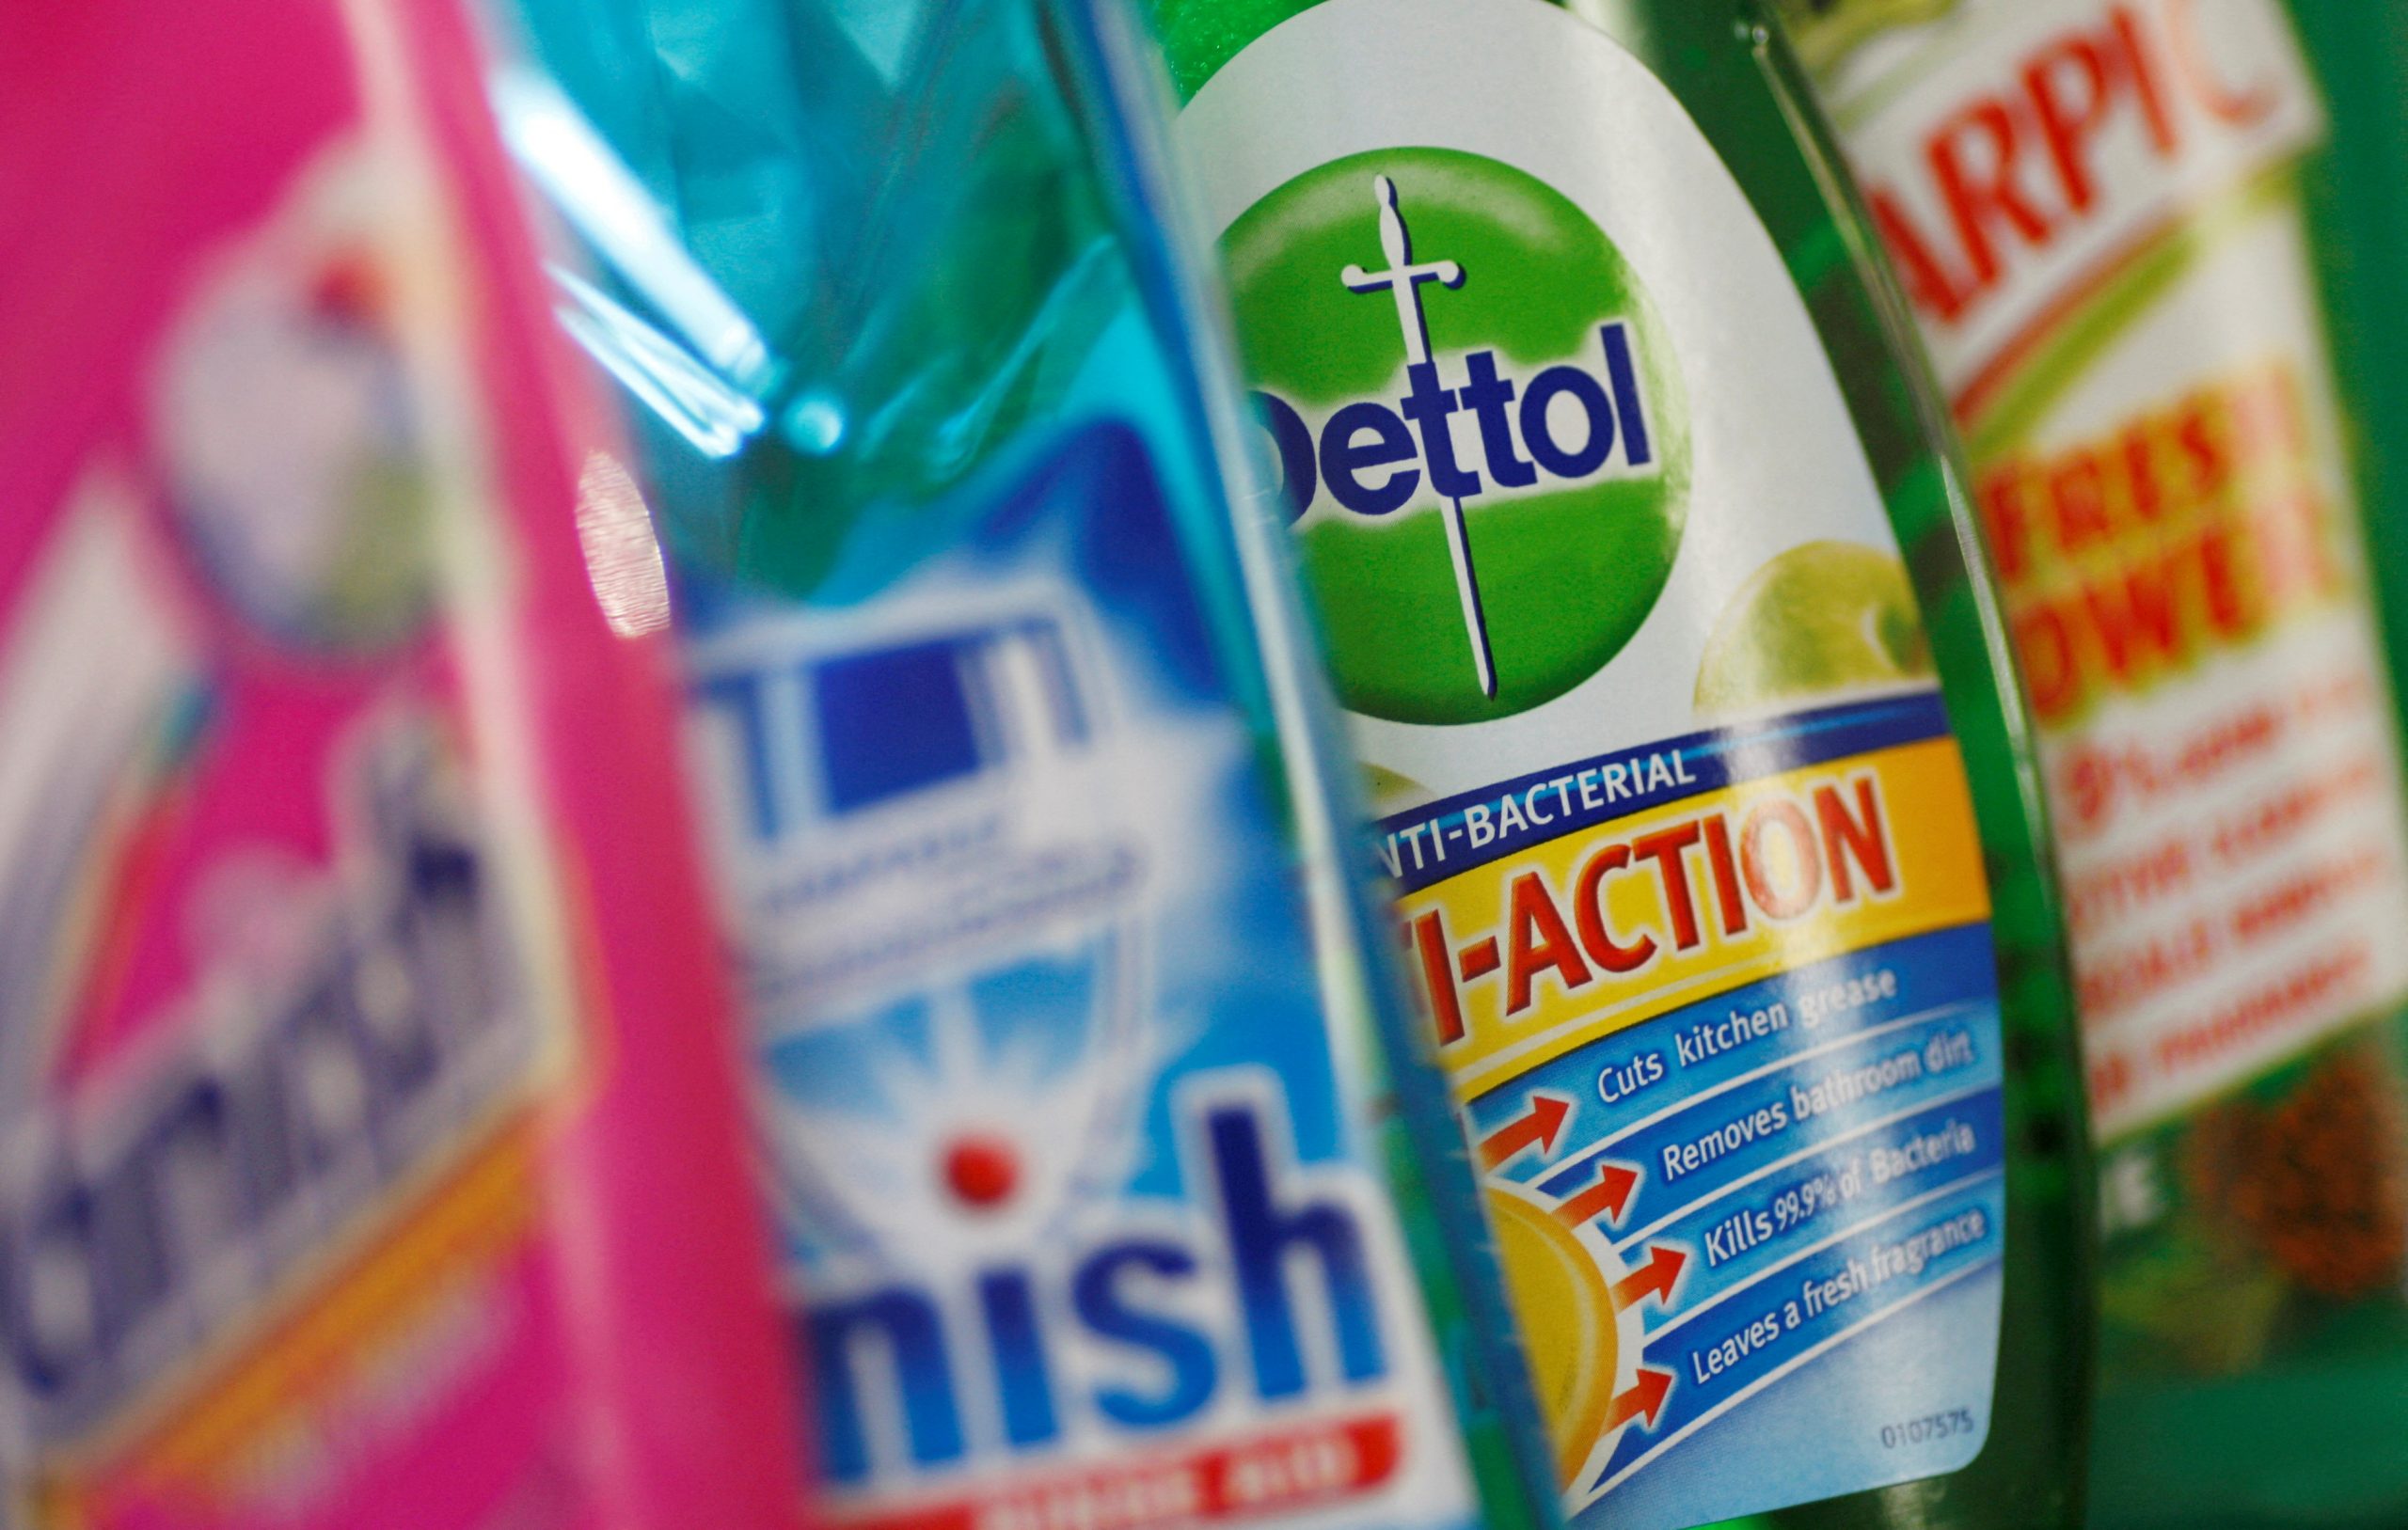 Reckitt upbeat on sales outlook as prices rise